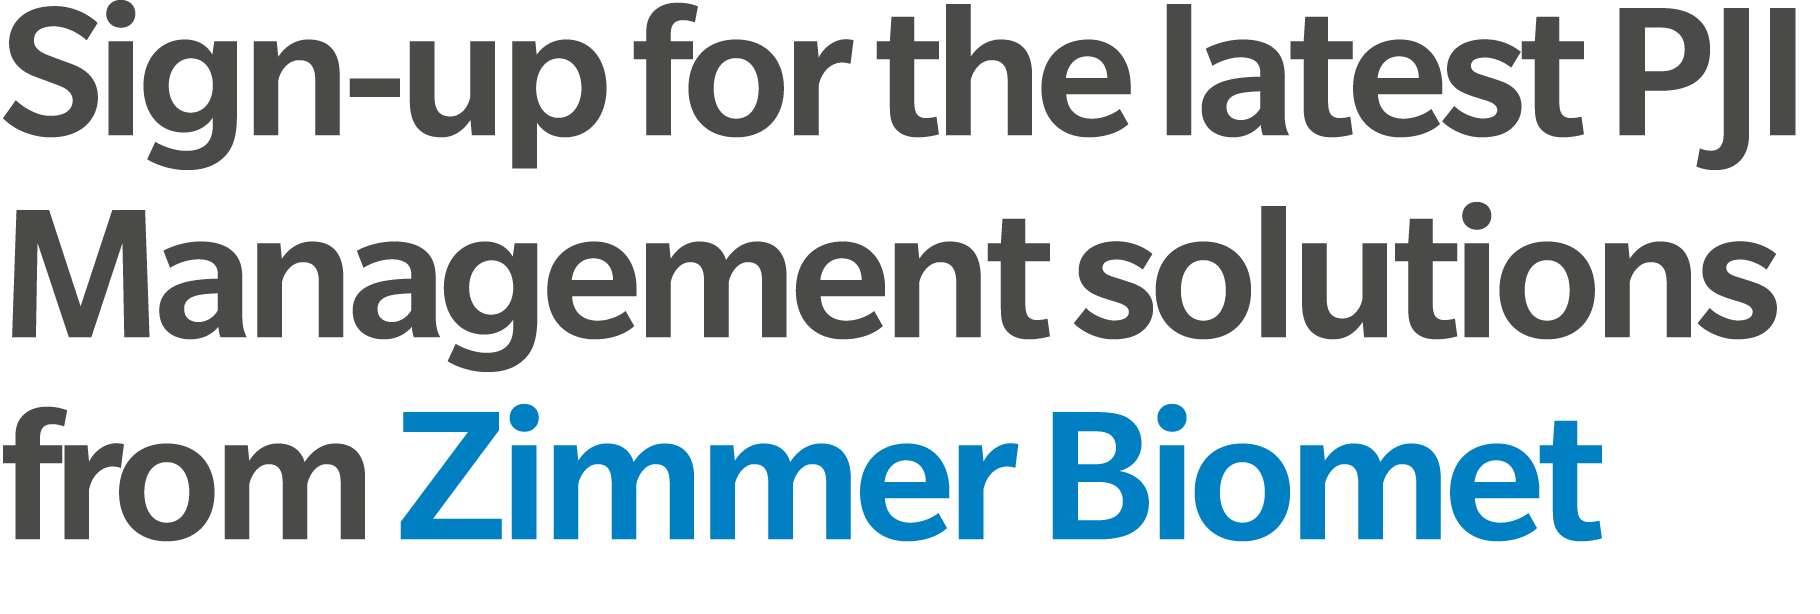 Sign up for the latest PJI Management solutions from Zimmer Biomet